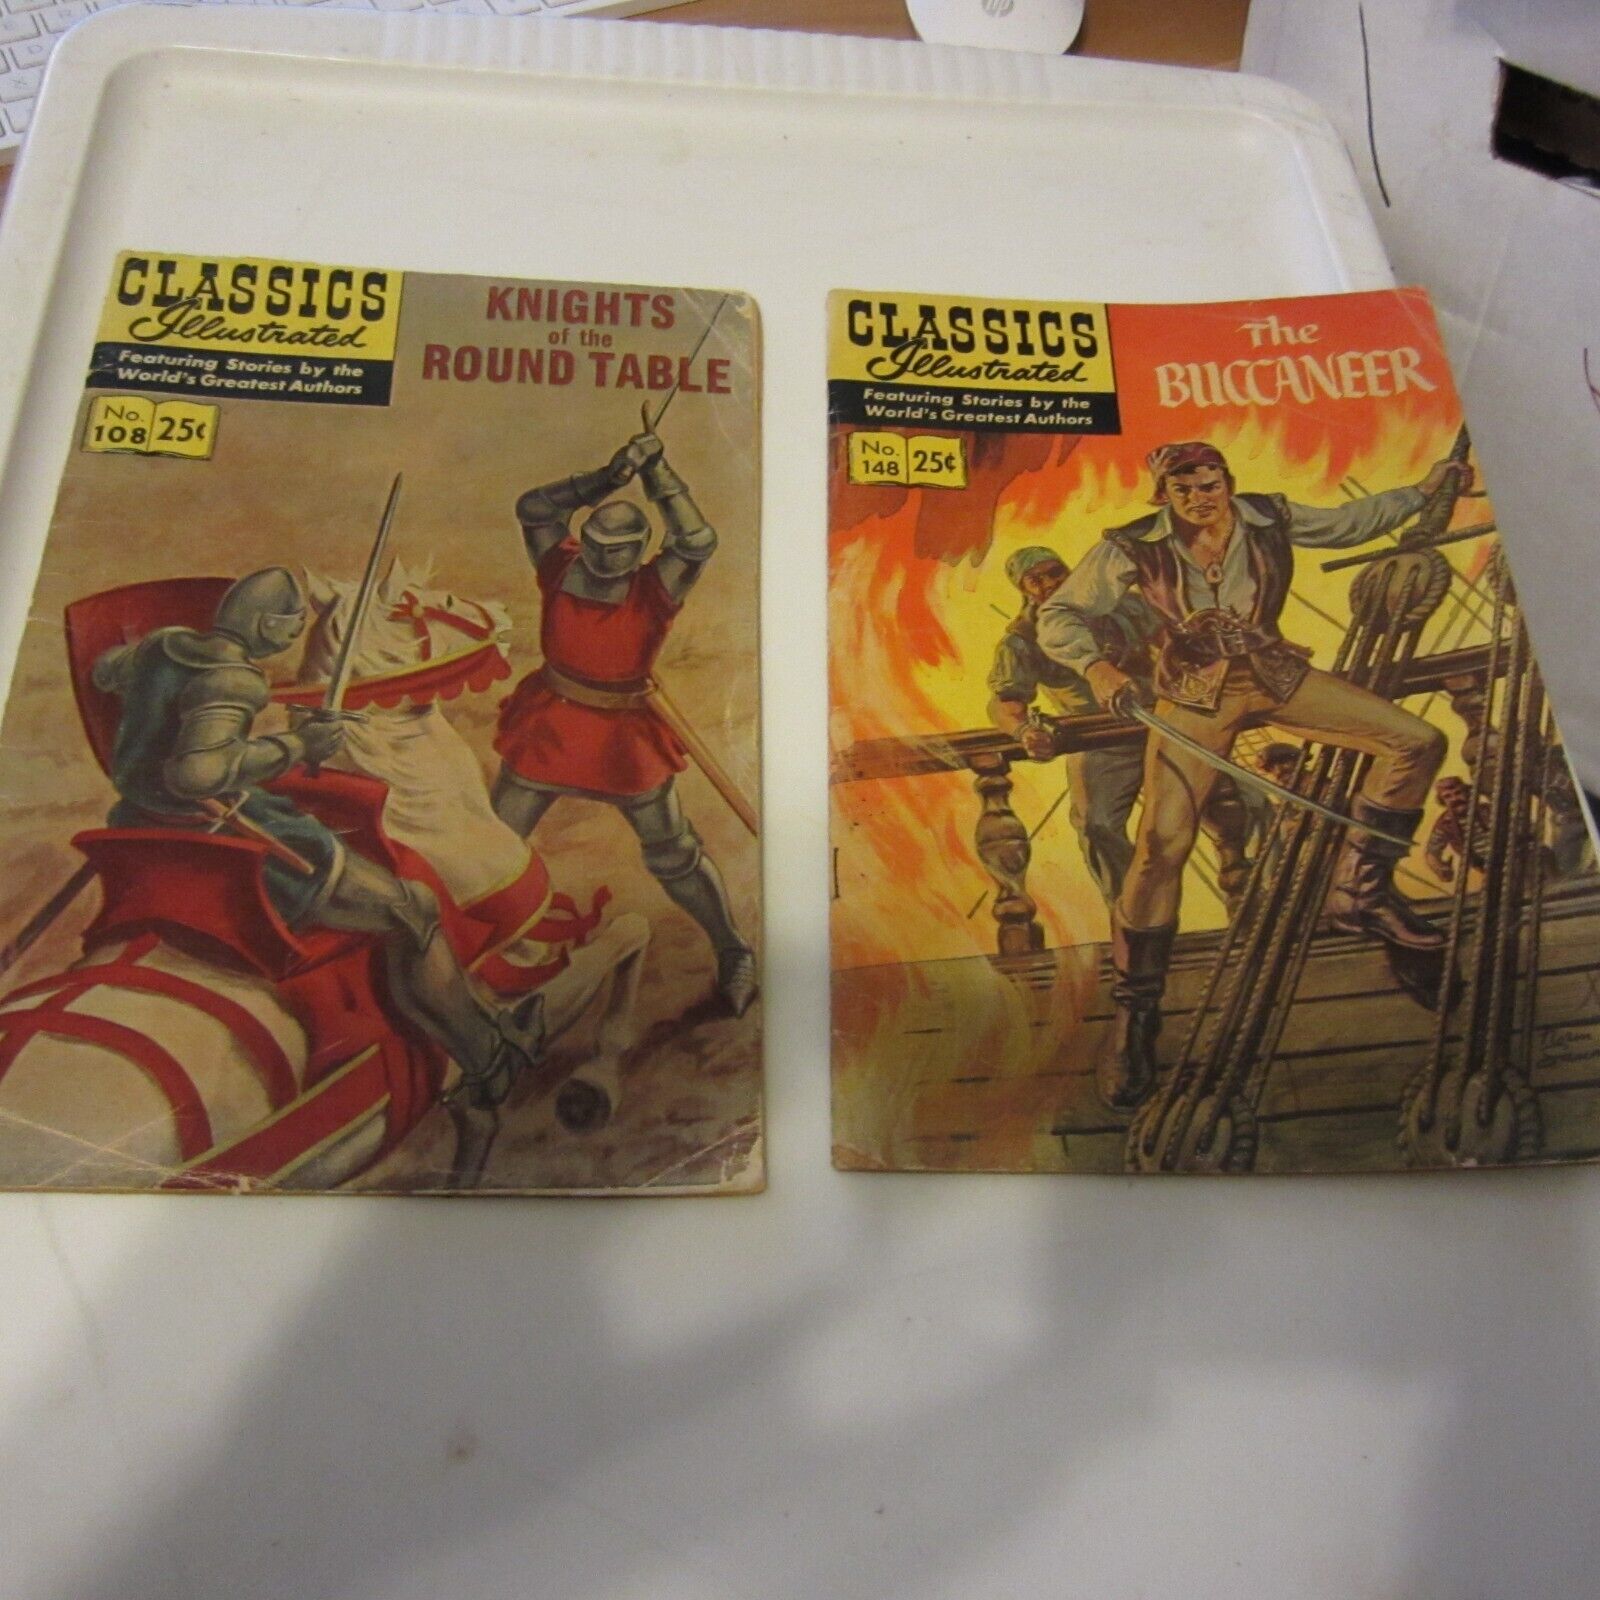 1953 CLASSICS ILLUSTRATED #108 +148 KNIGHTS  ROUND TABLE +BUCCANEER